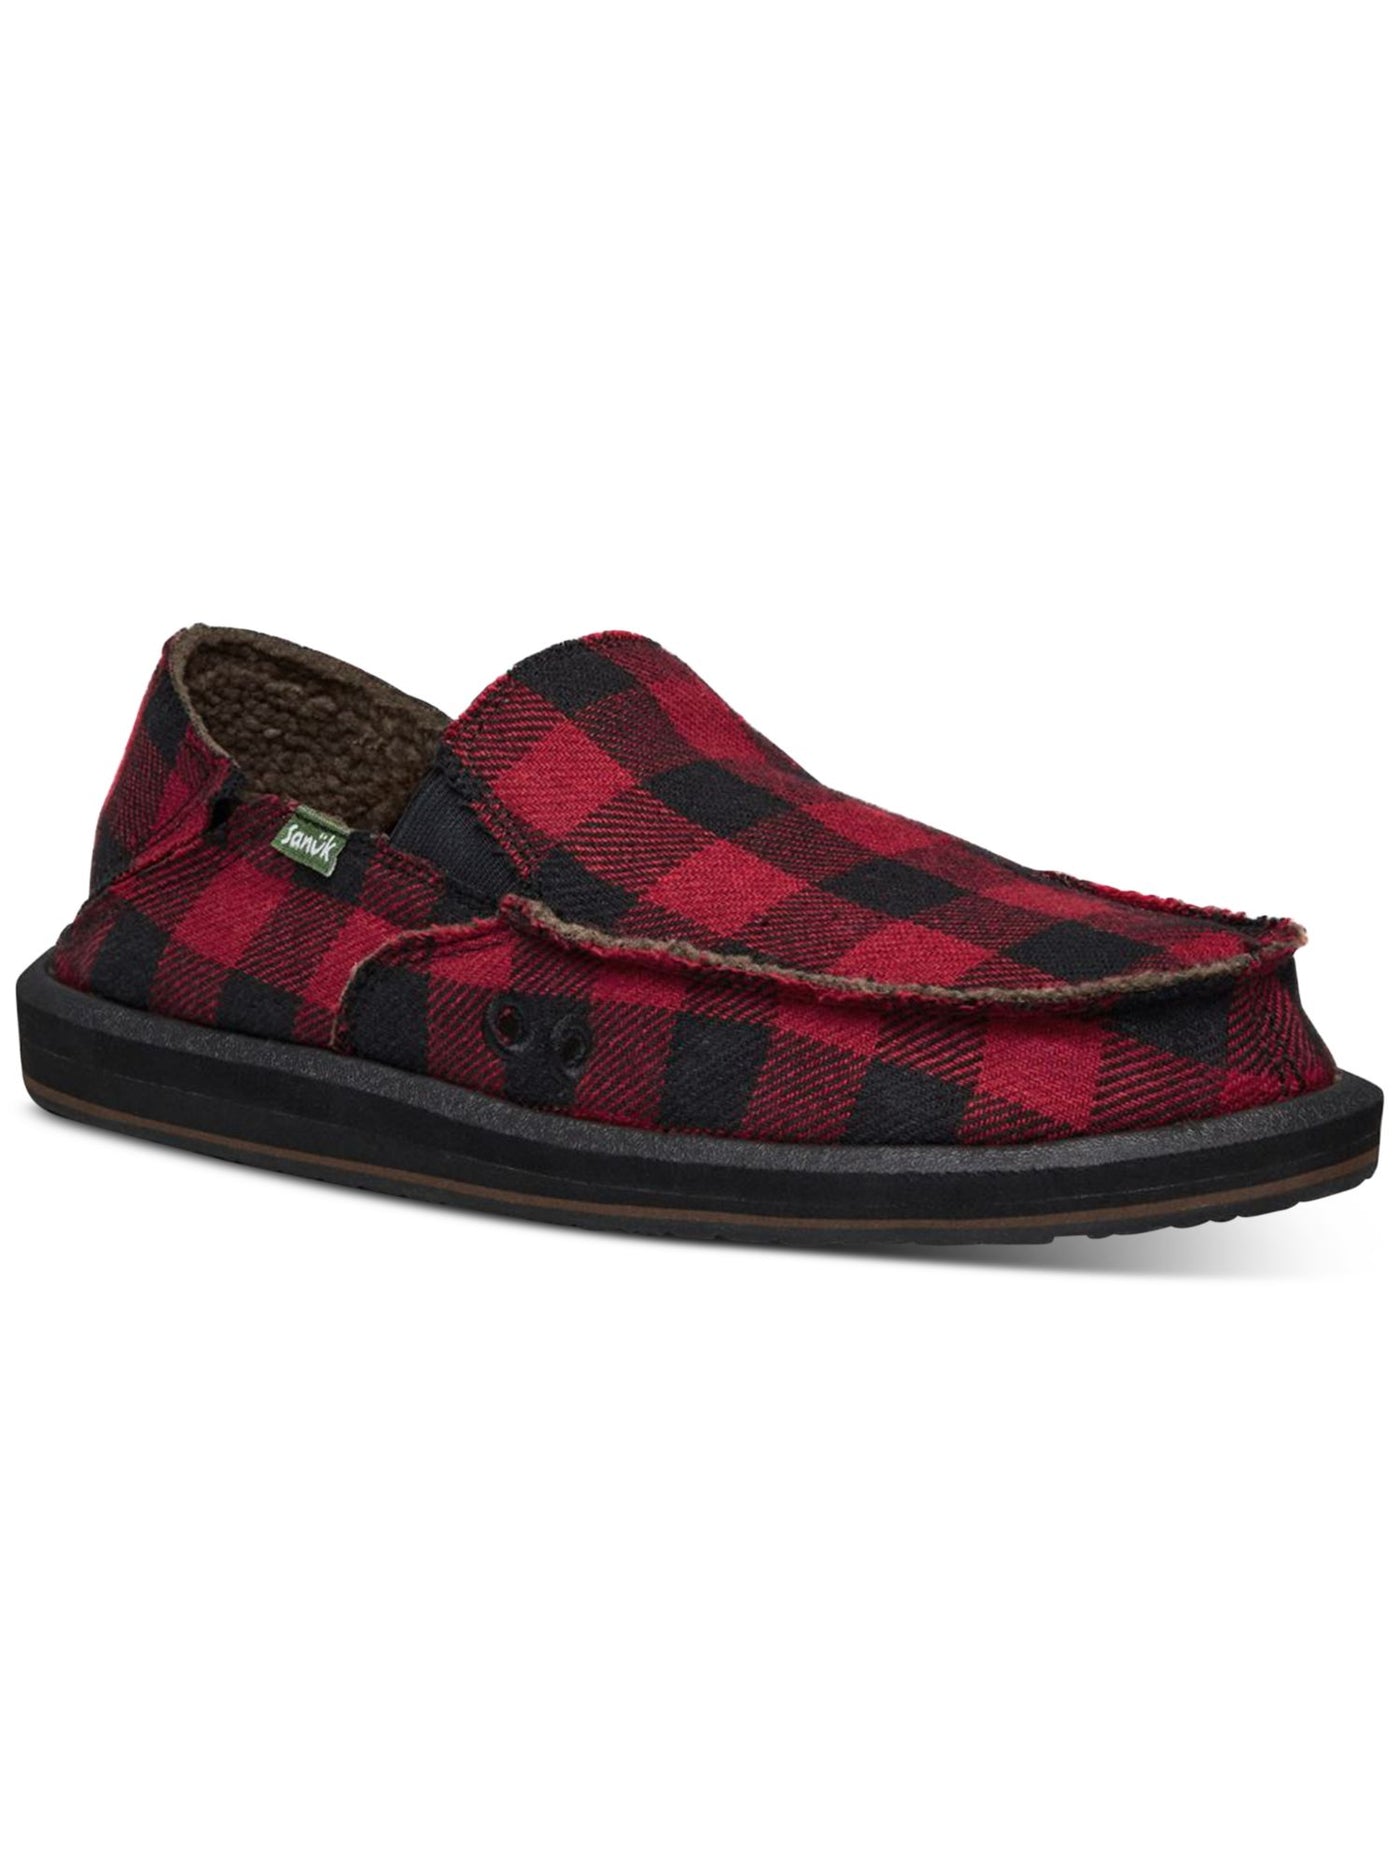 SANUK Mens Red Plaid Buffalo Padded Goring Comfort Vagabond Chill Round Toe Slip On Loafers Shoes 12